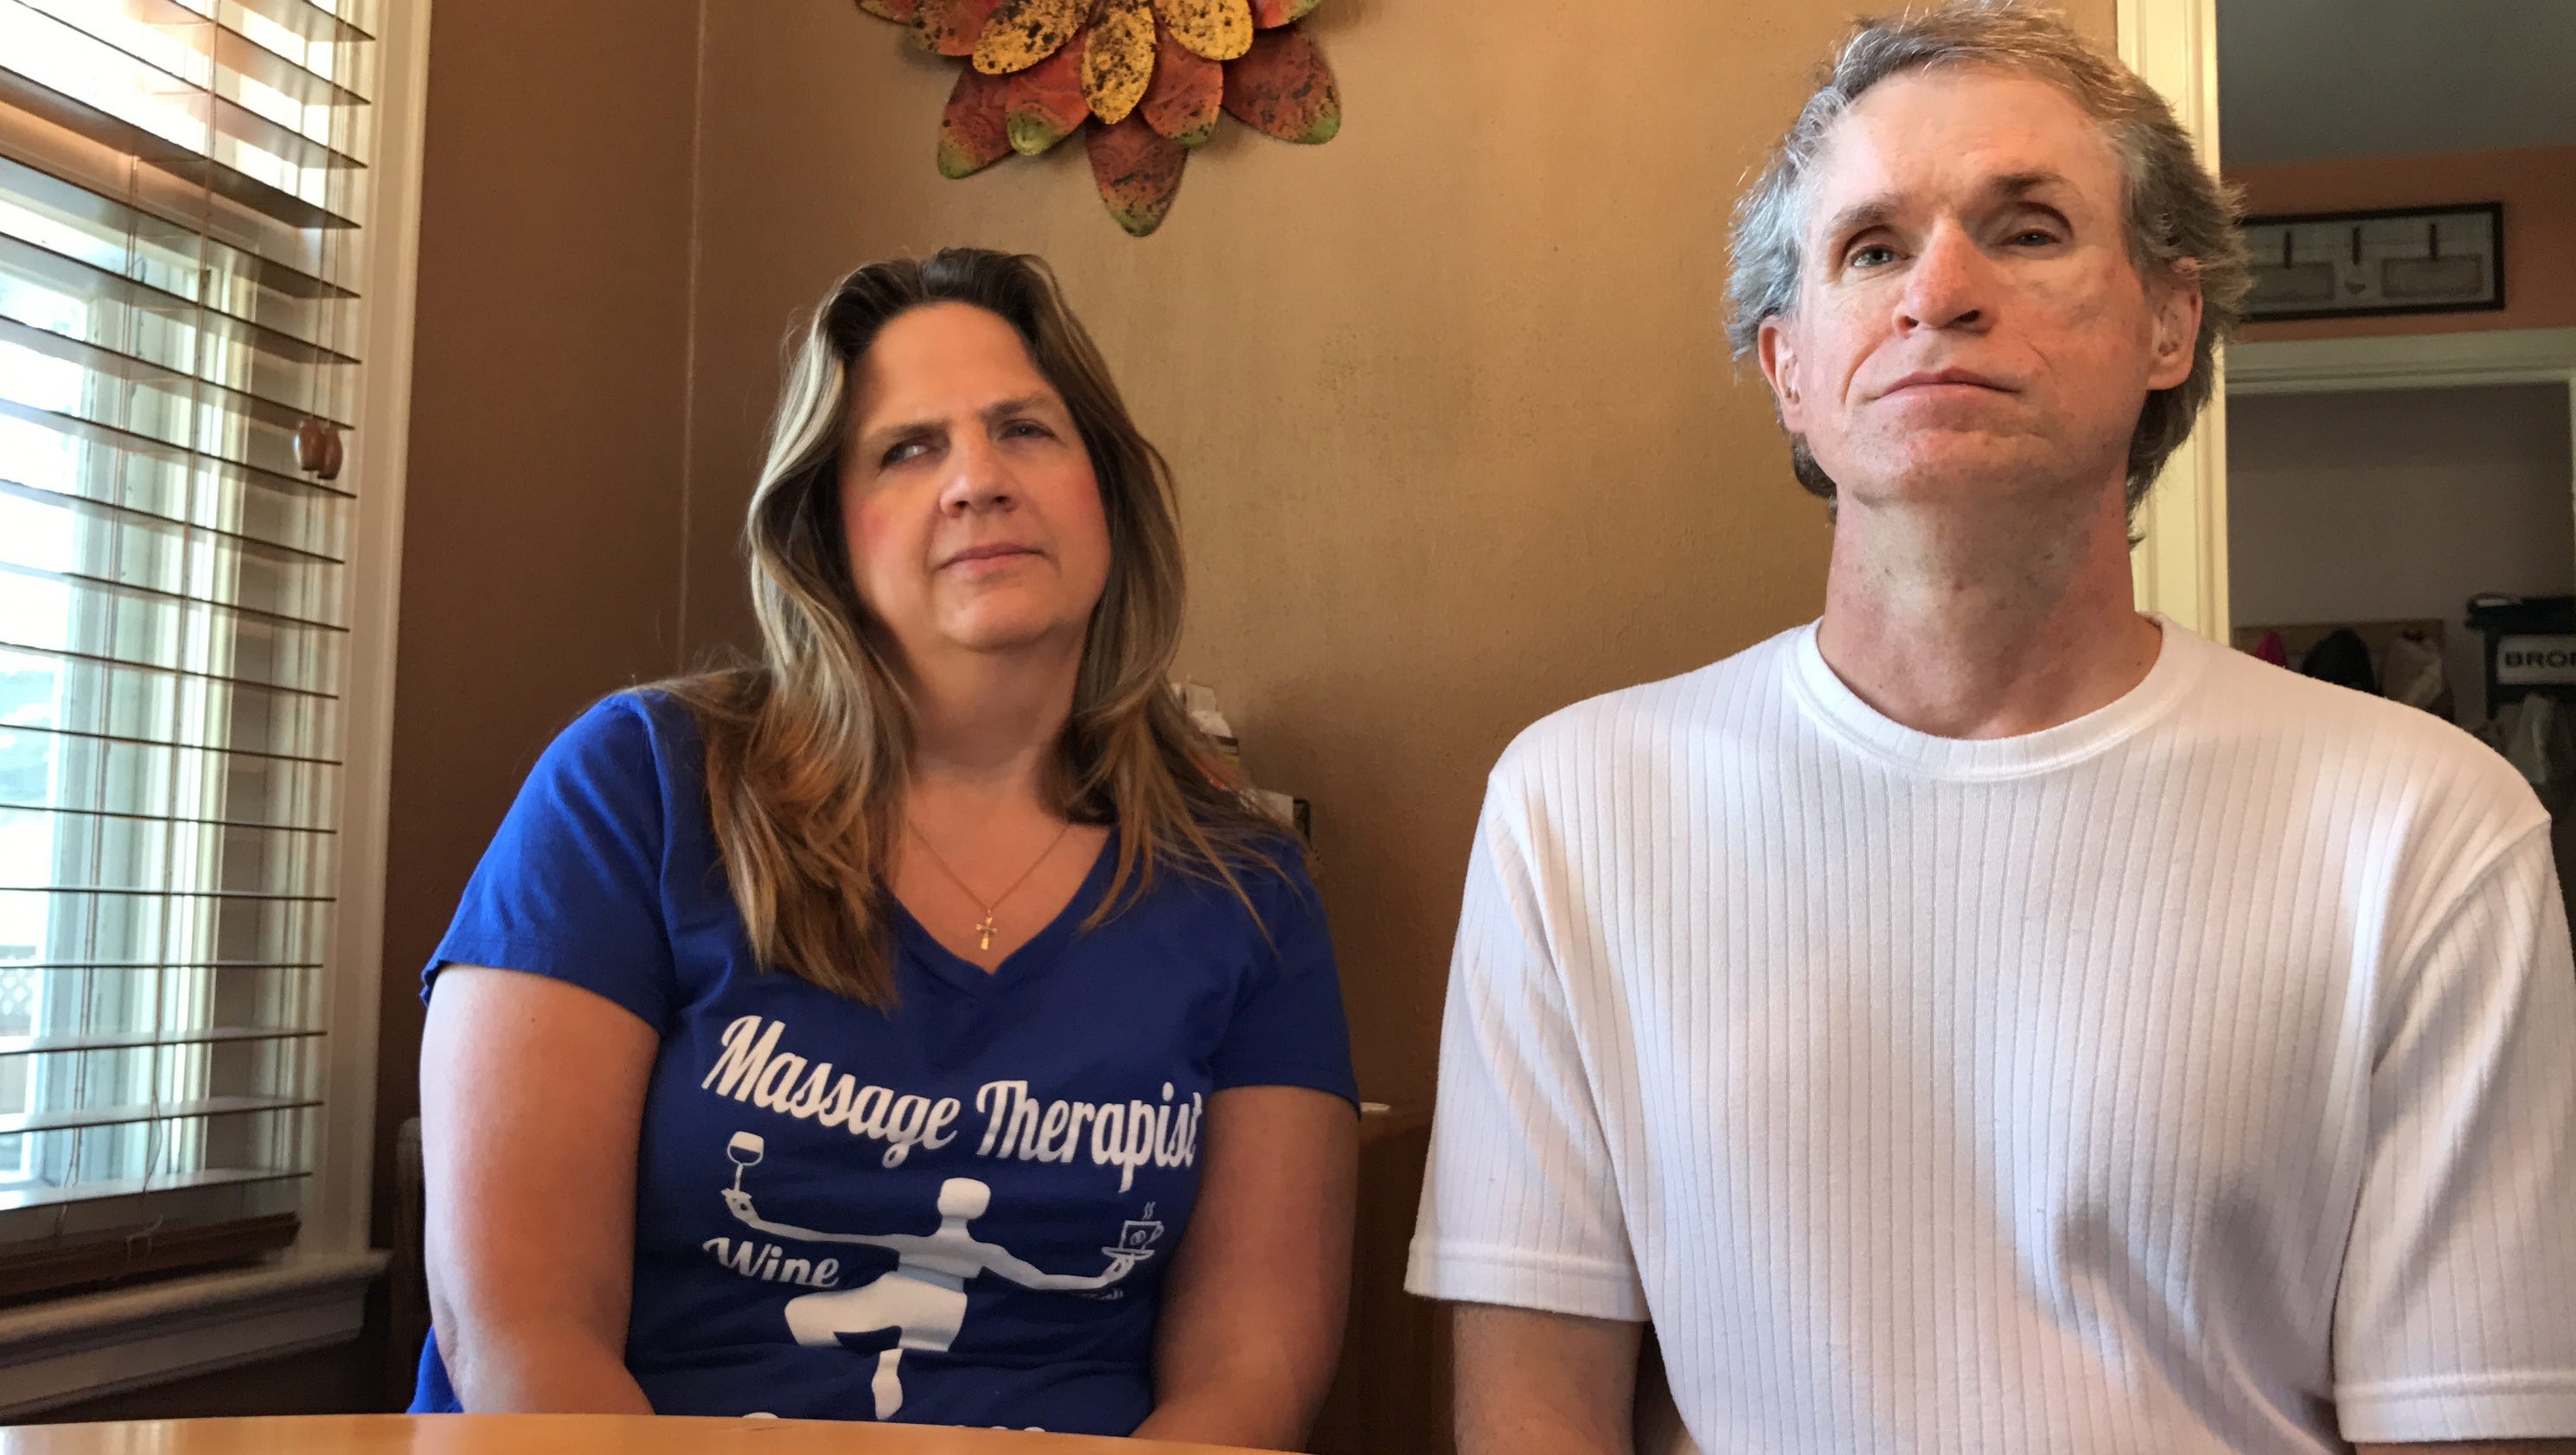 Watch the white cane: Couple urges drivers pay attention - Sioux Falls Argus Leader